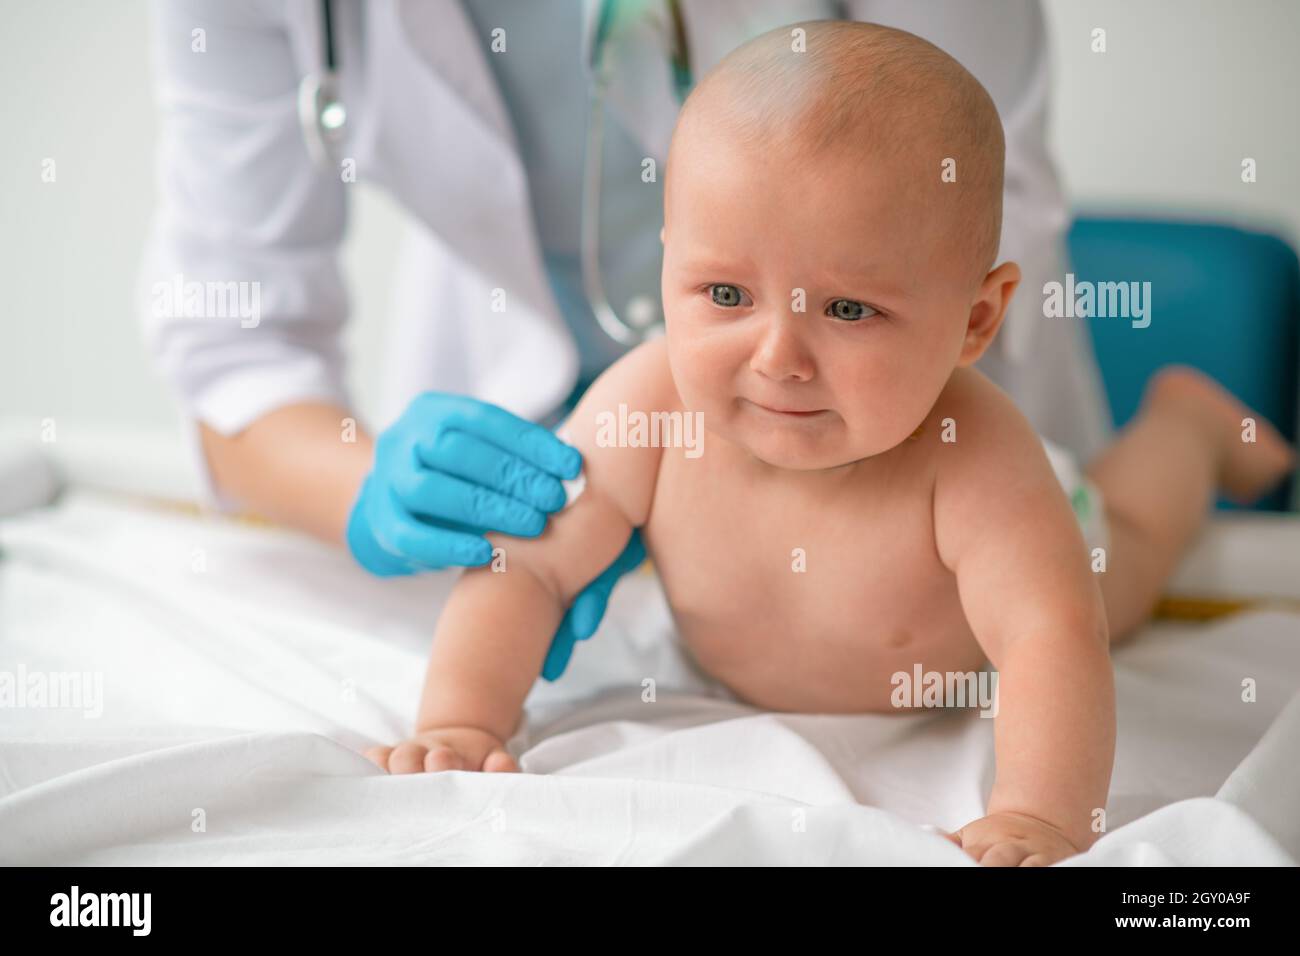 Tranquil baby being prepared for an injection Stock Photo